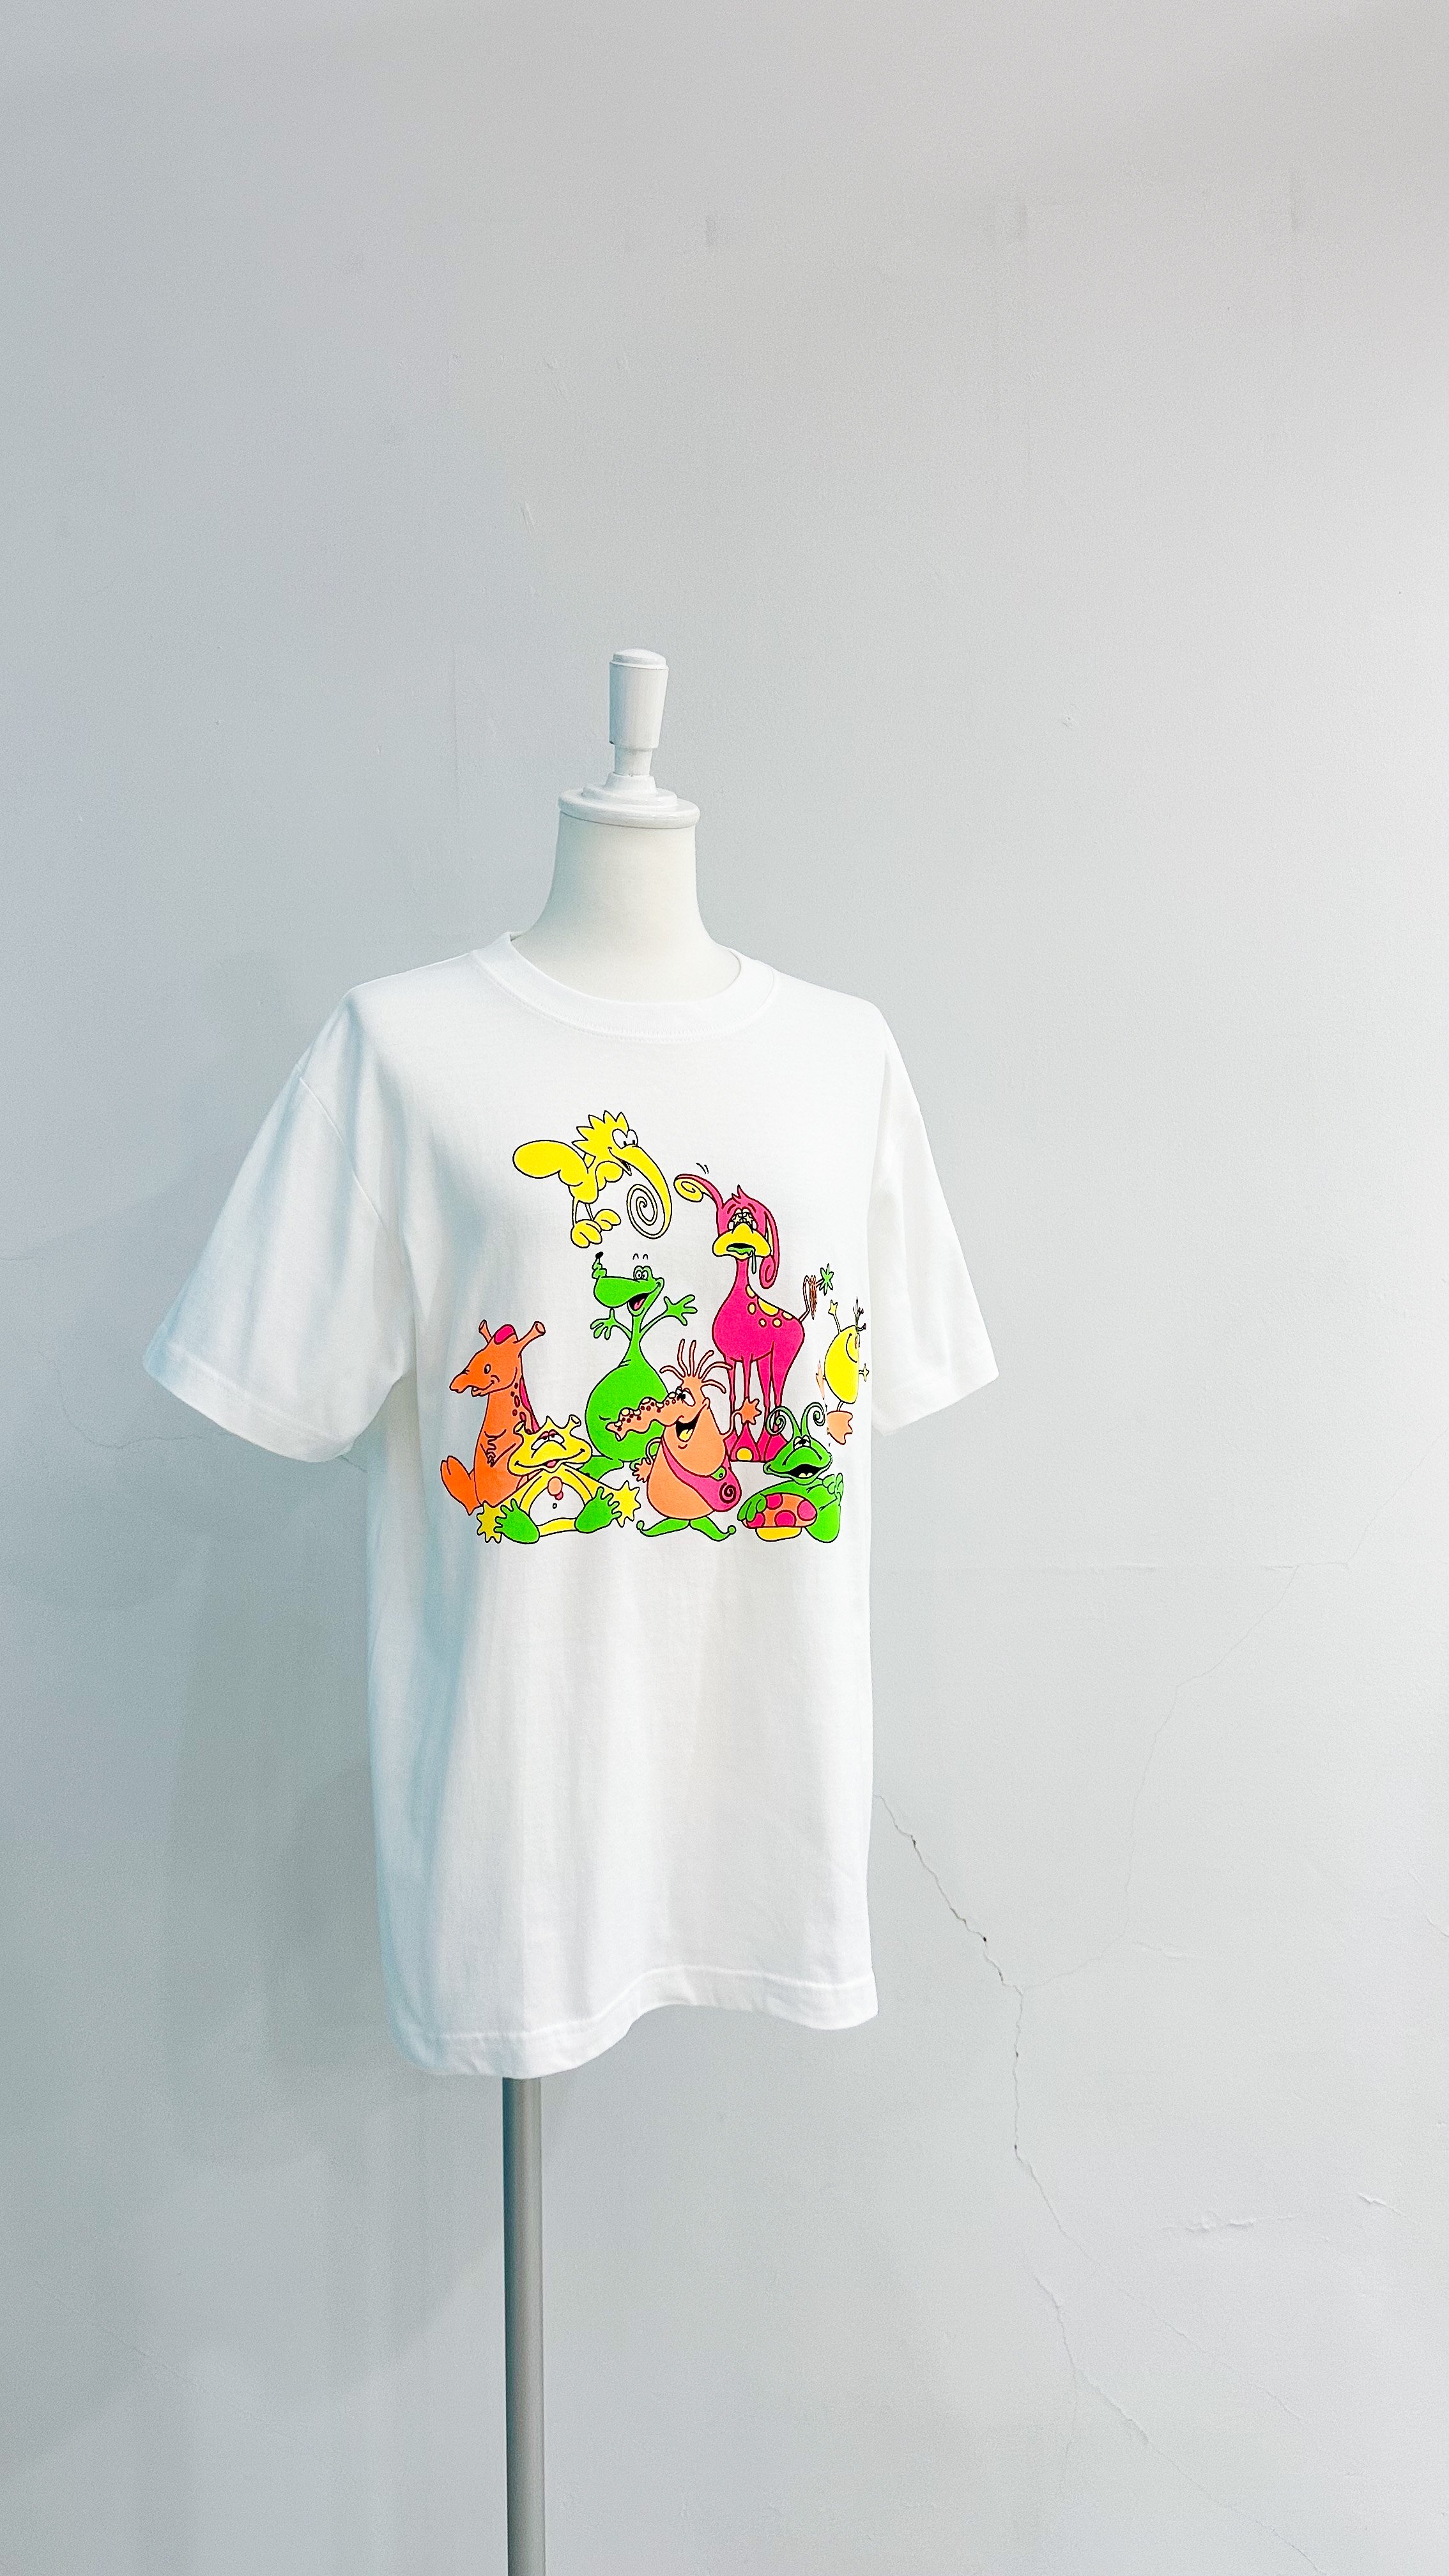 <img class='new_mark_img1' src='https://img.shop-pro.jp/img/new/icons47.gif' style='border:none;display:inline;margin:0px;padding:0px;width:auto;' />Alien Homies Tee